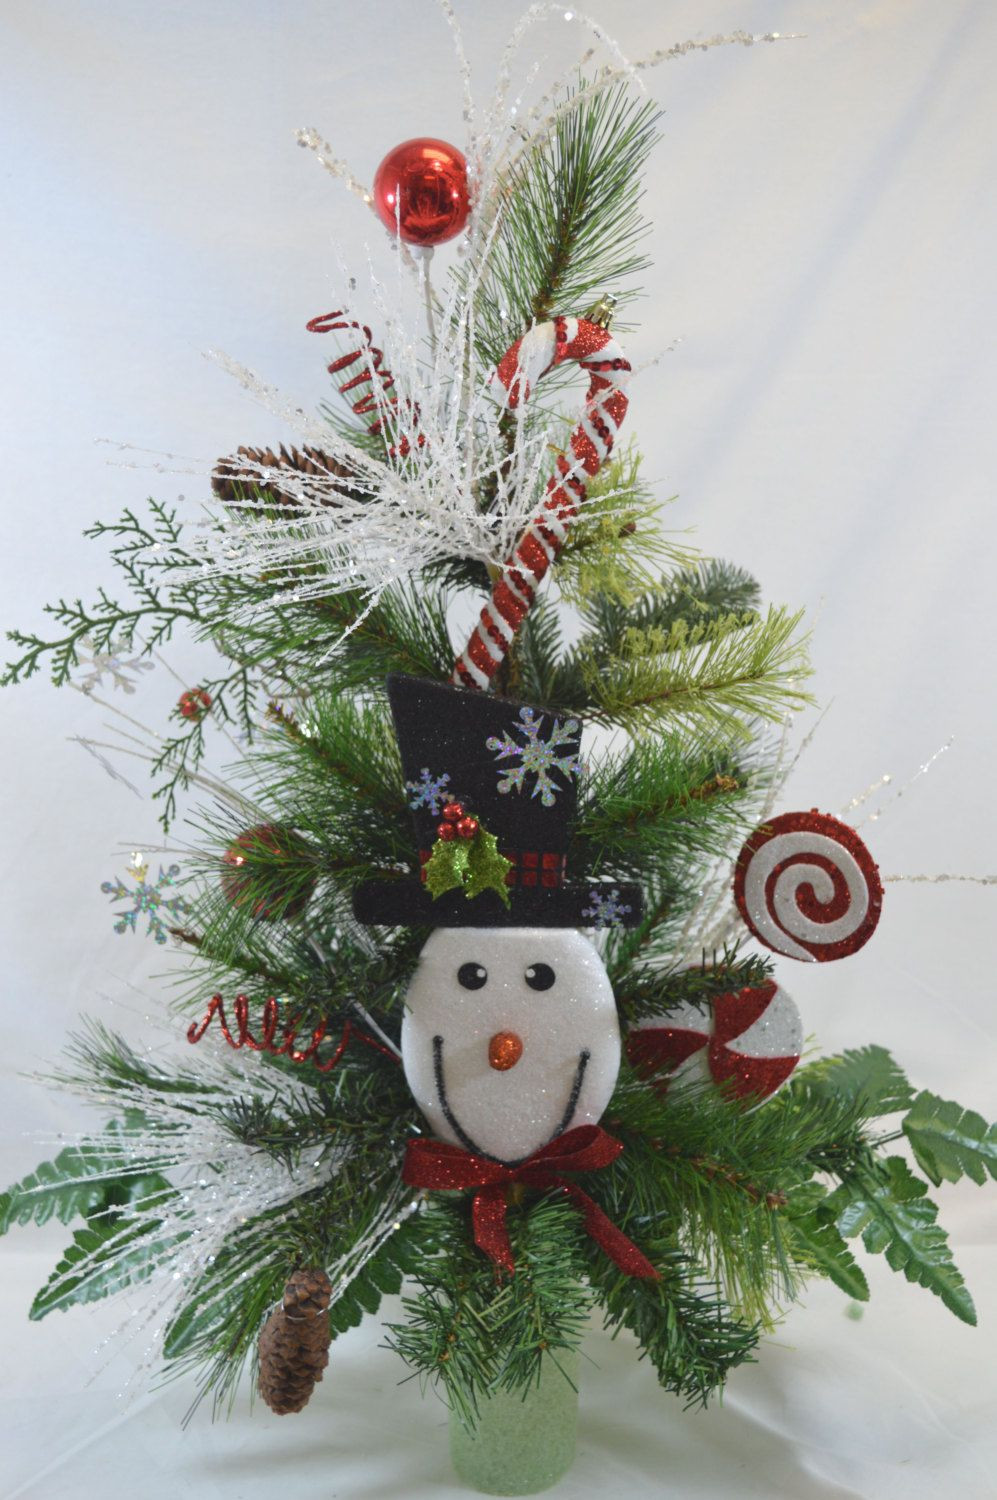 christmas tree for cemetery vase of stay in the vase cemetery flowers with regard to c1110 holiday christmas tree cemetery cone vase arrangementtombstone saddle cemetery